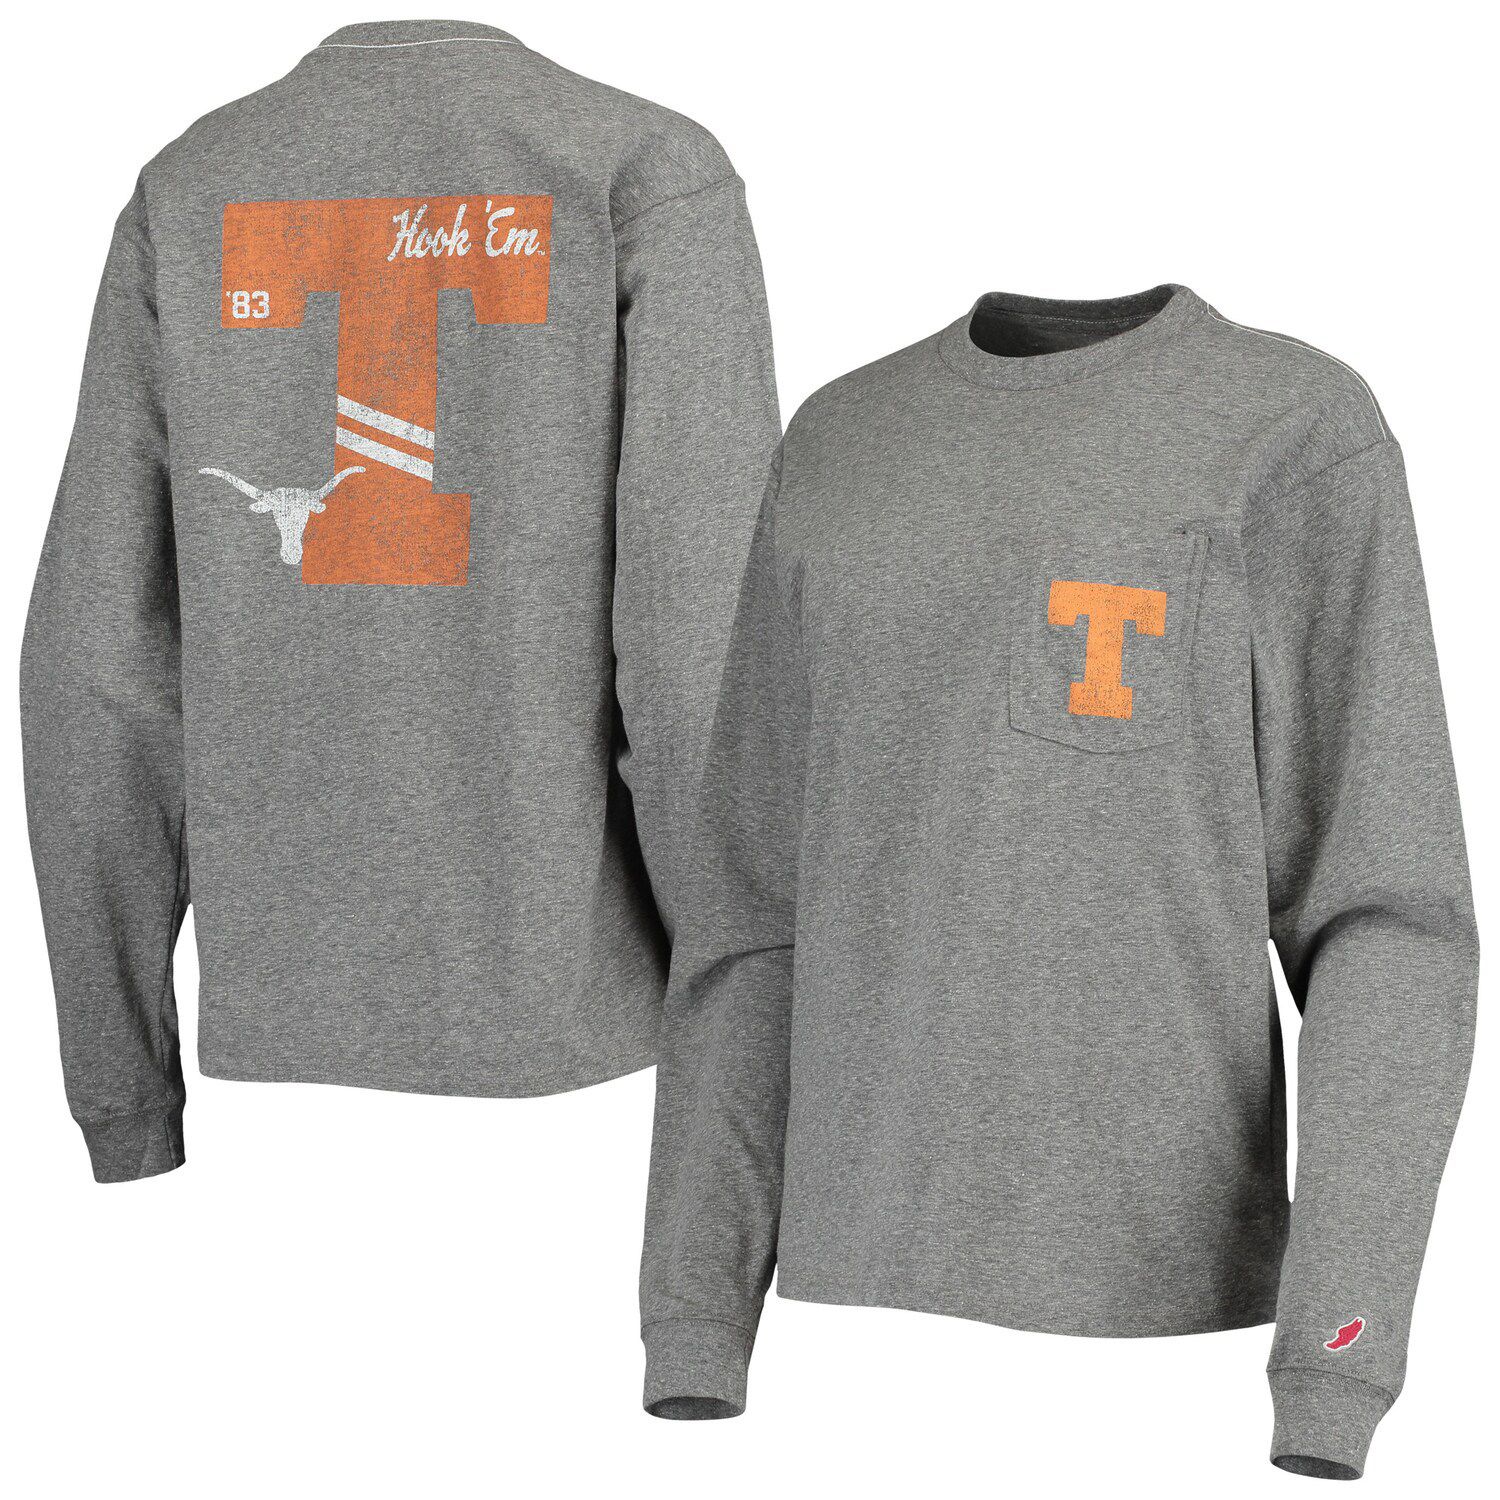 Image for Unbranded Women's League Collegiate Wear Heathered Gray Texas Longhorns Pocket Oversized Long Sleeve T-Shirt at Kohl's.